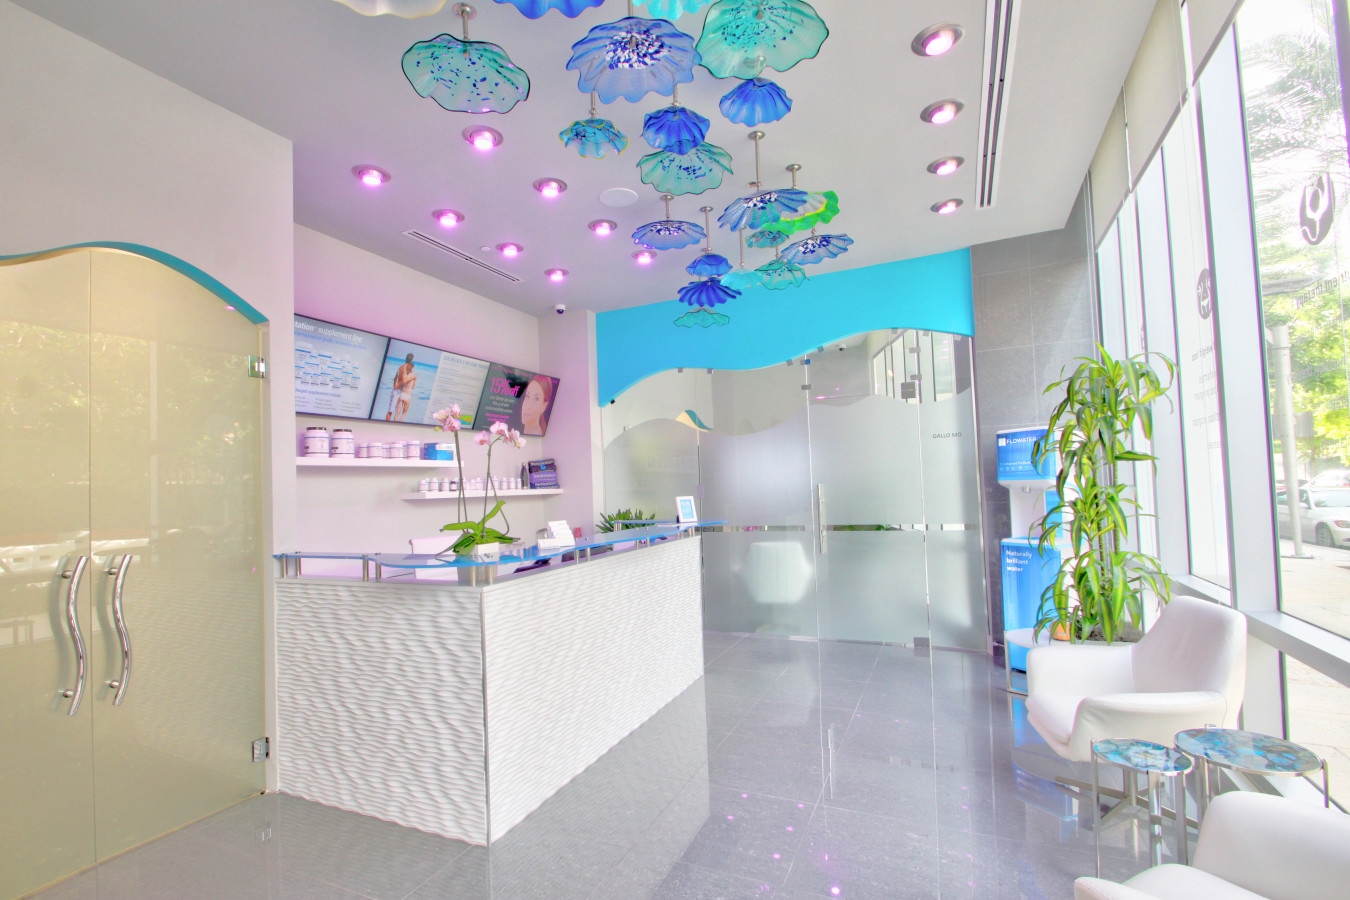 Redefine your healthcare at the biostation located in Midtown